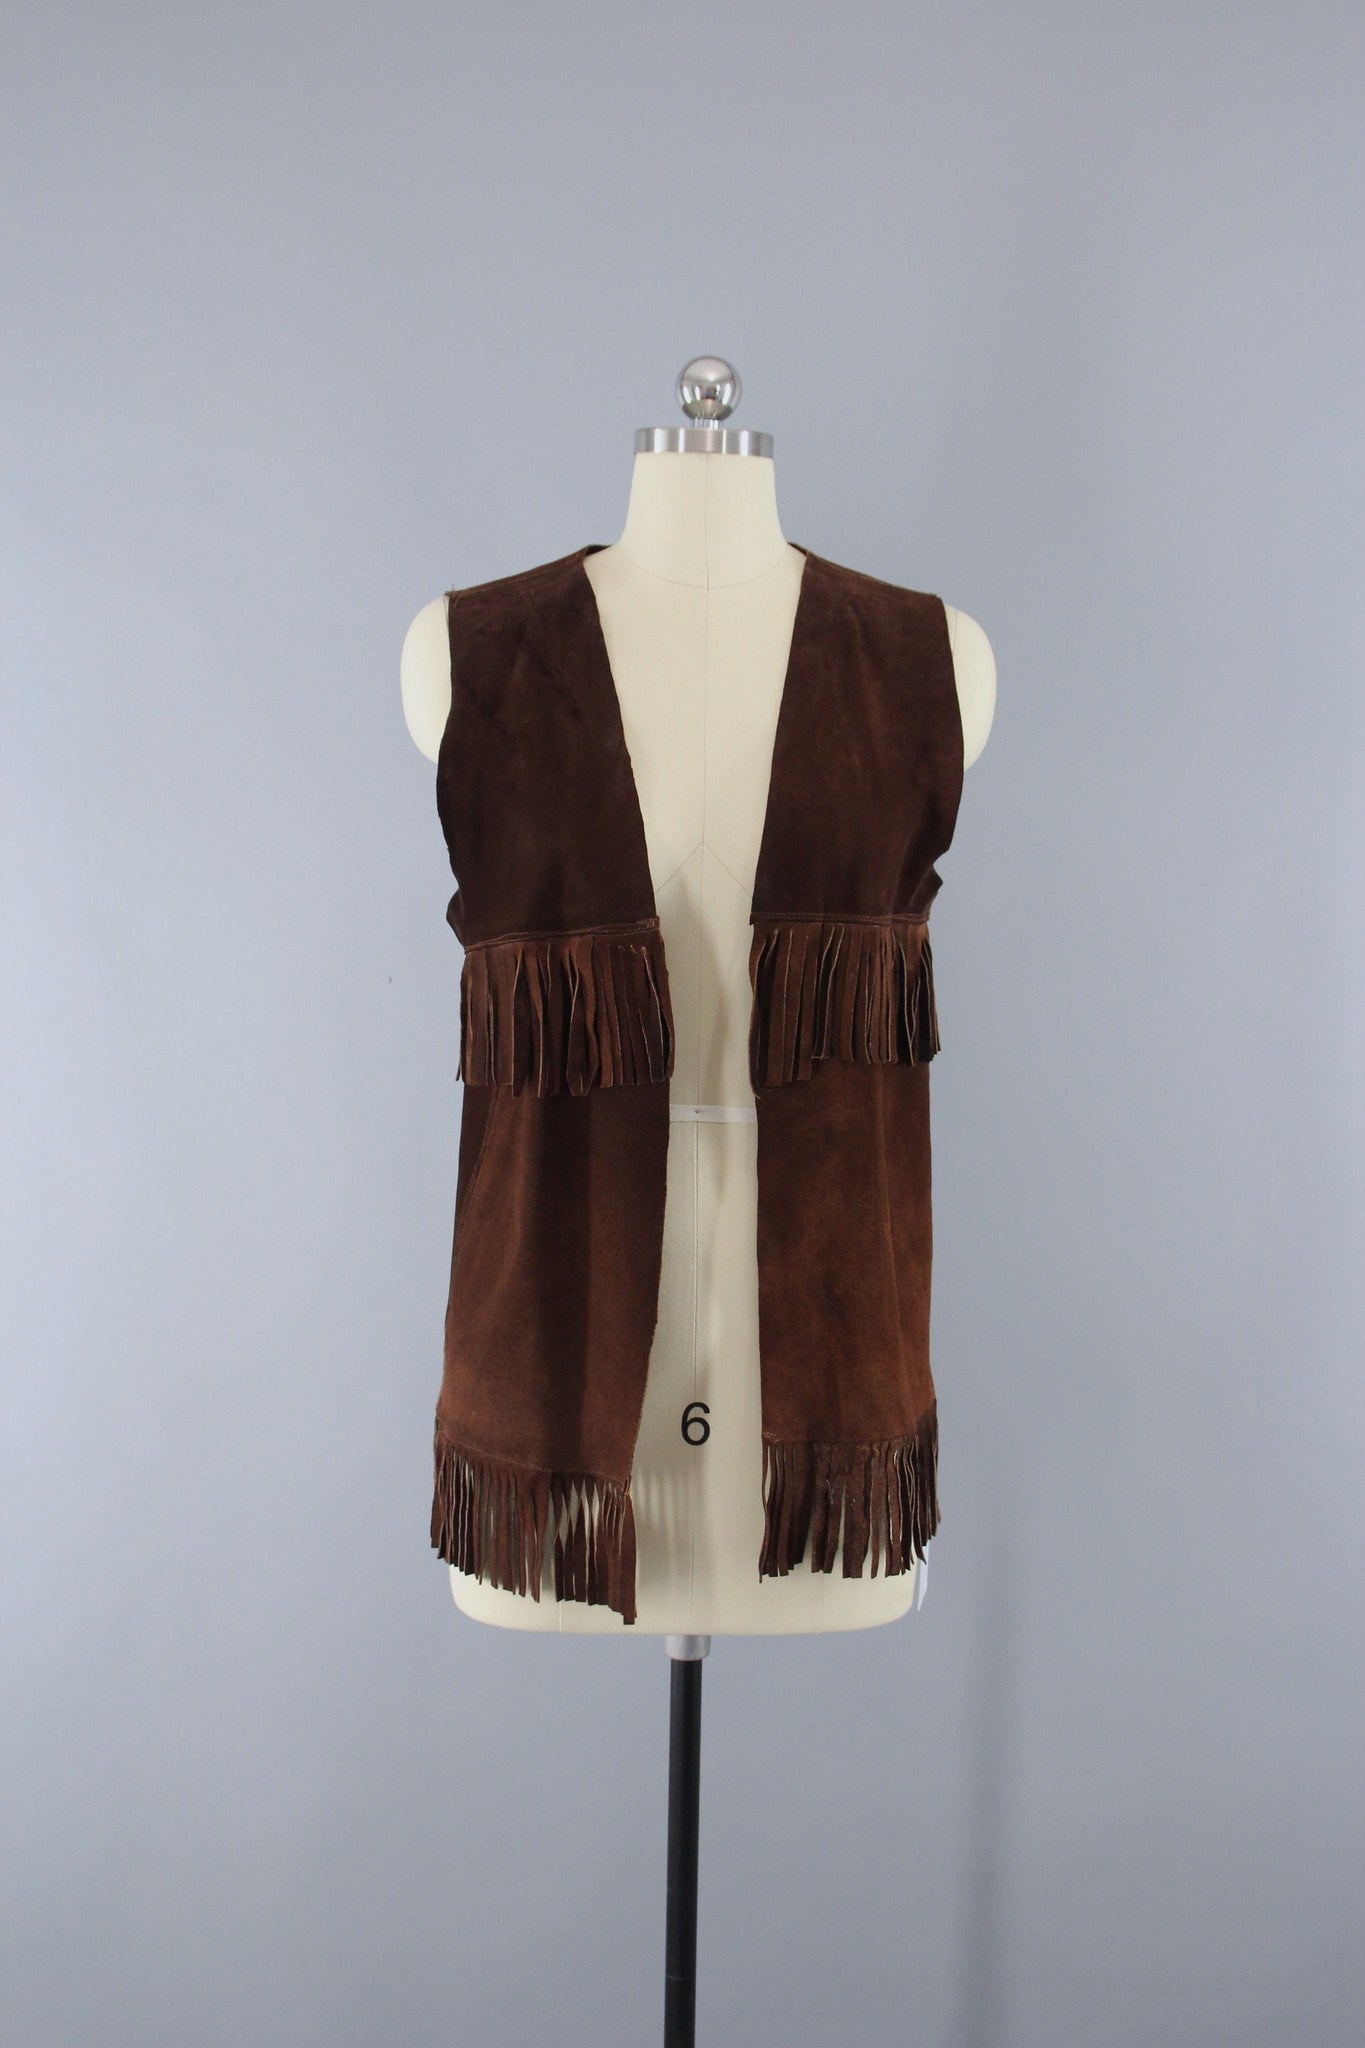 Vintage 1970s Suede Vest with Fringe - ThisBlueBird